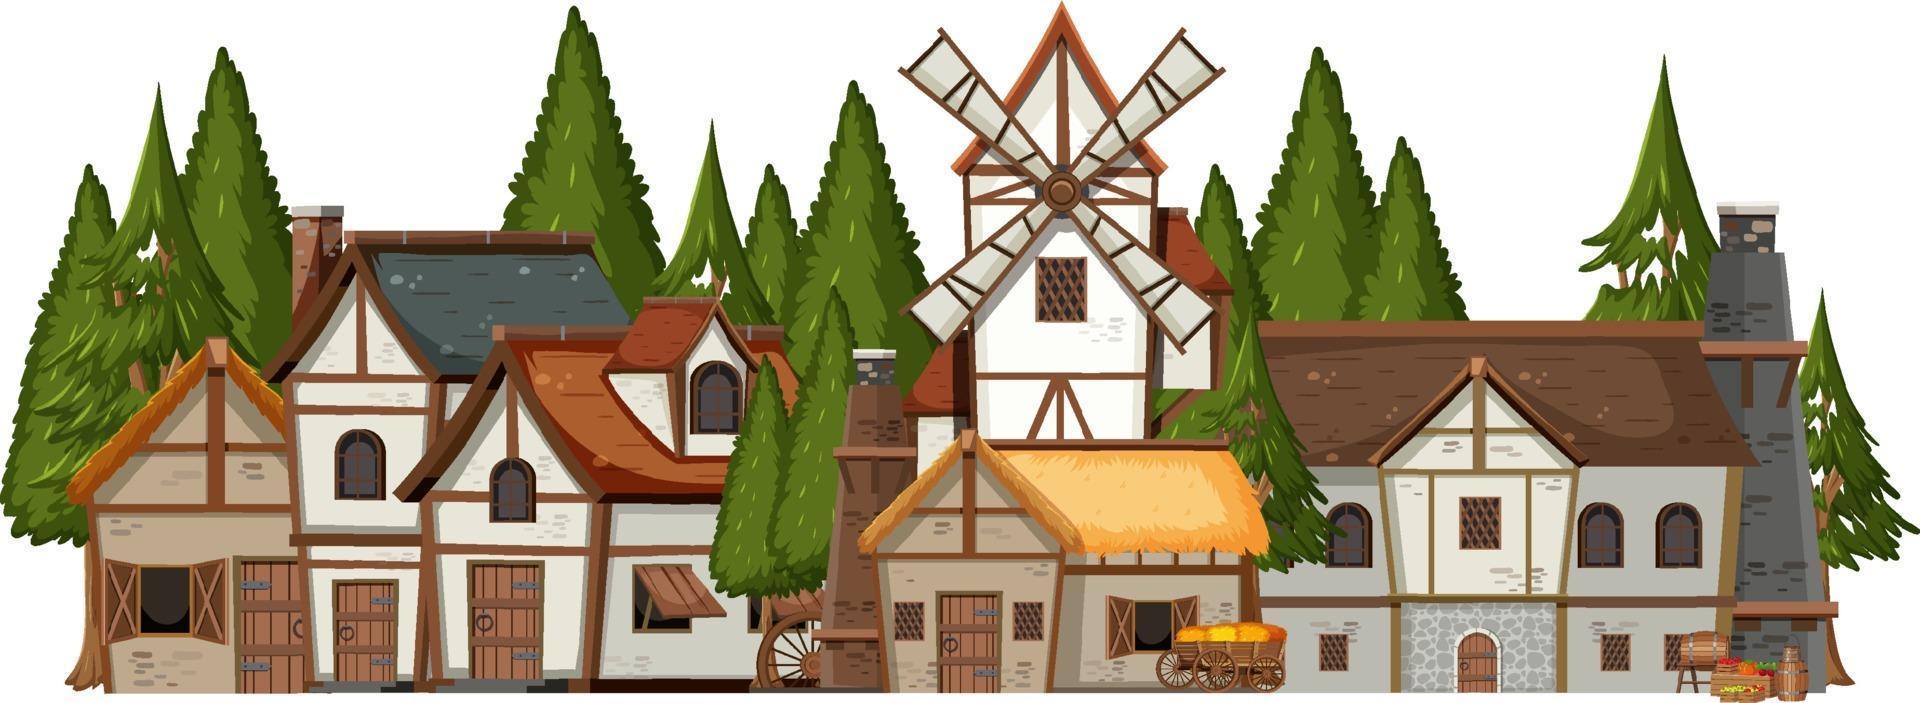 Medieval village with pine forest vector